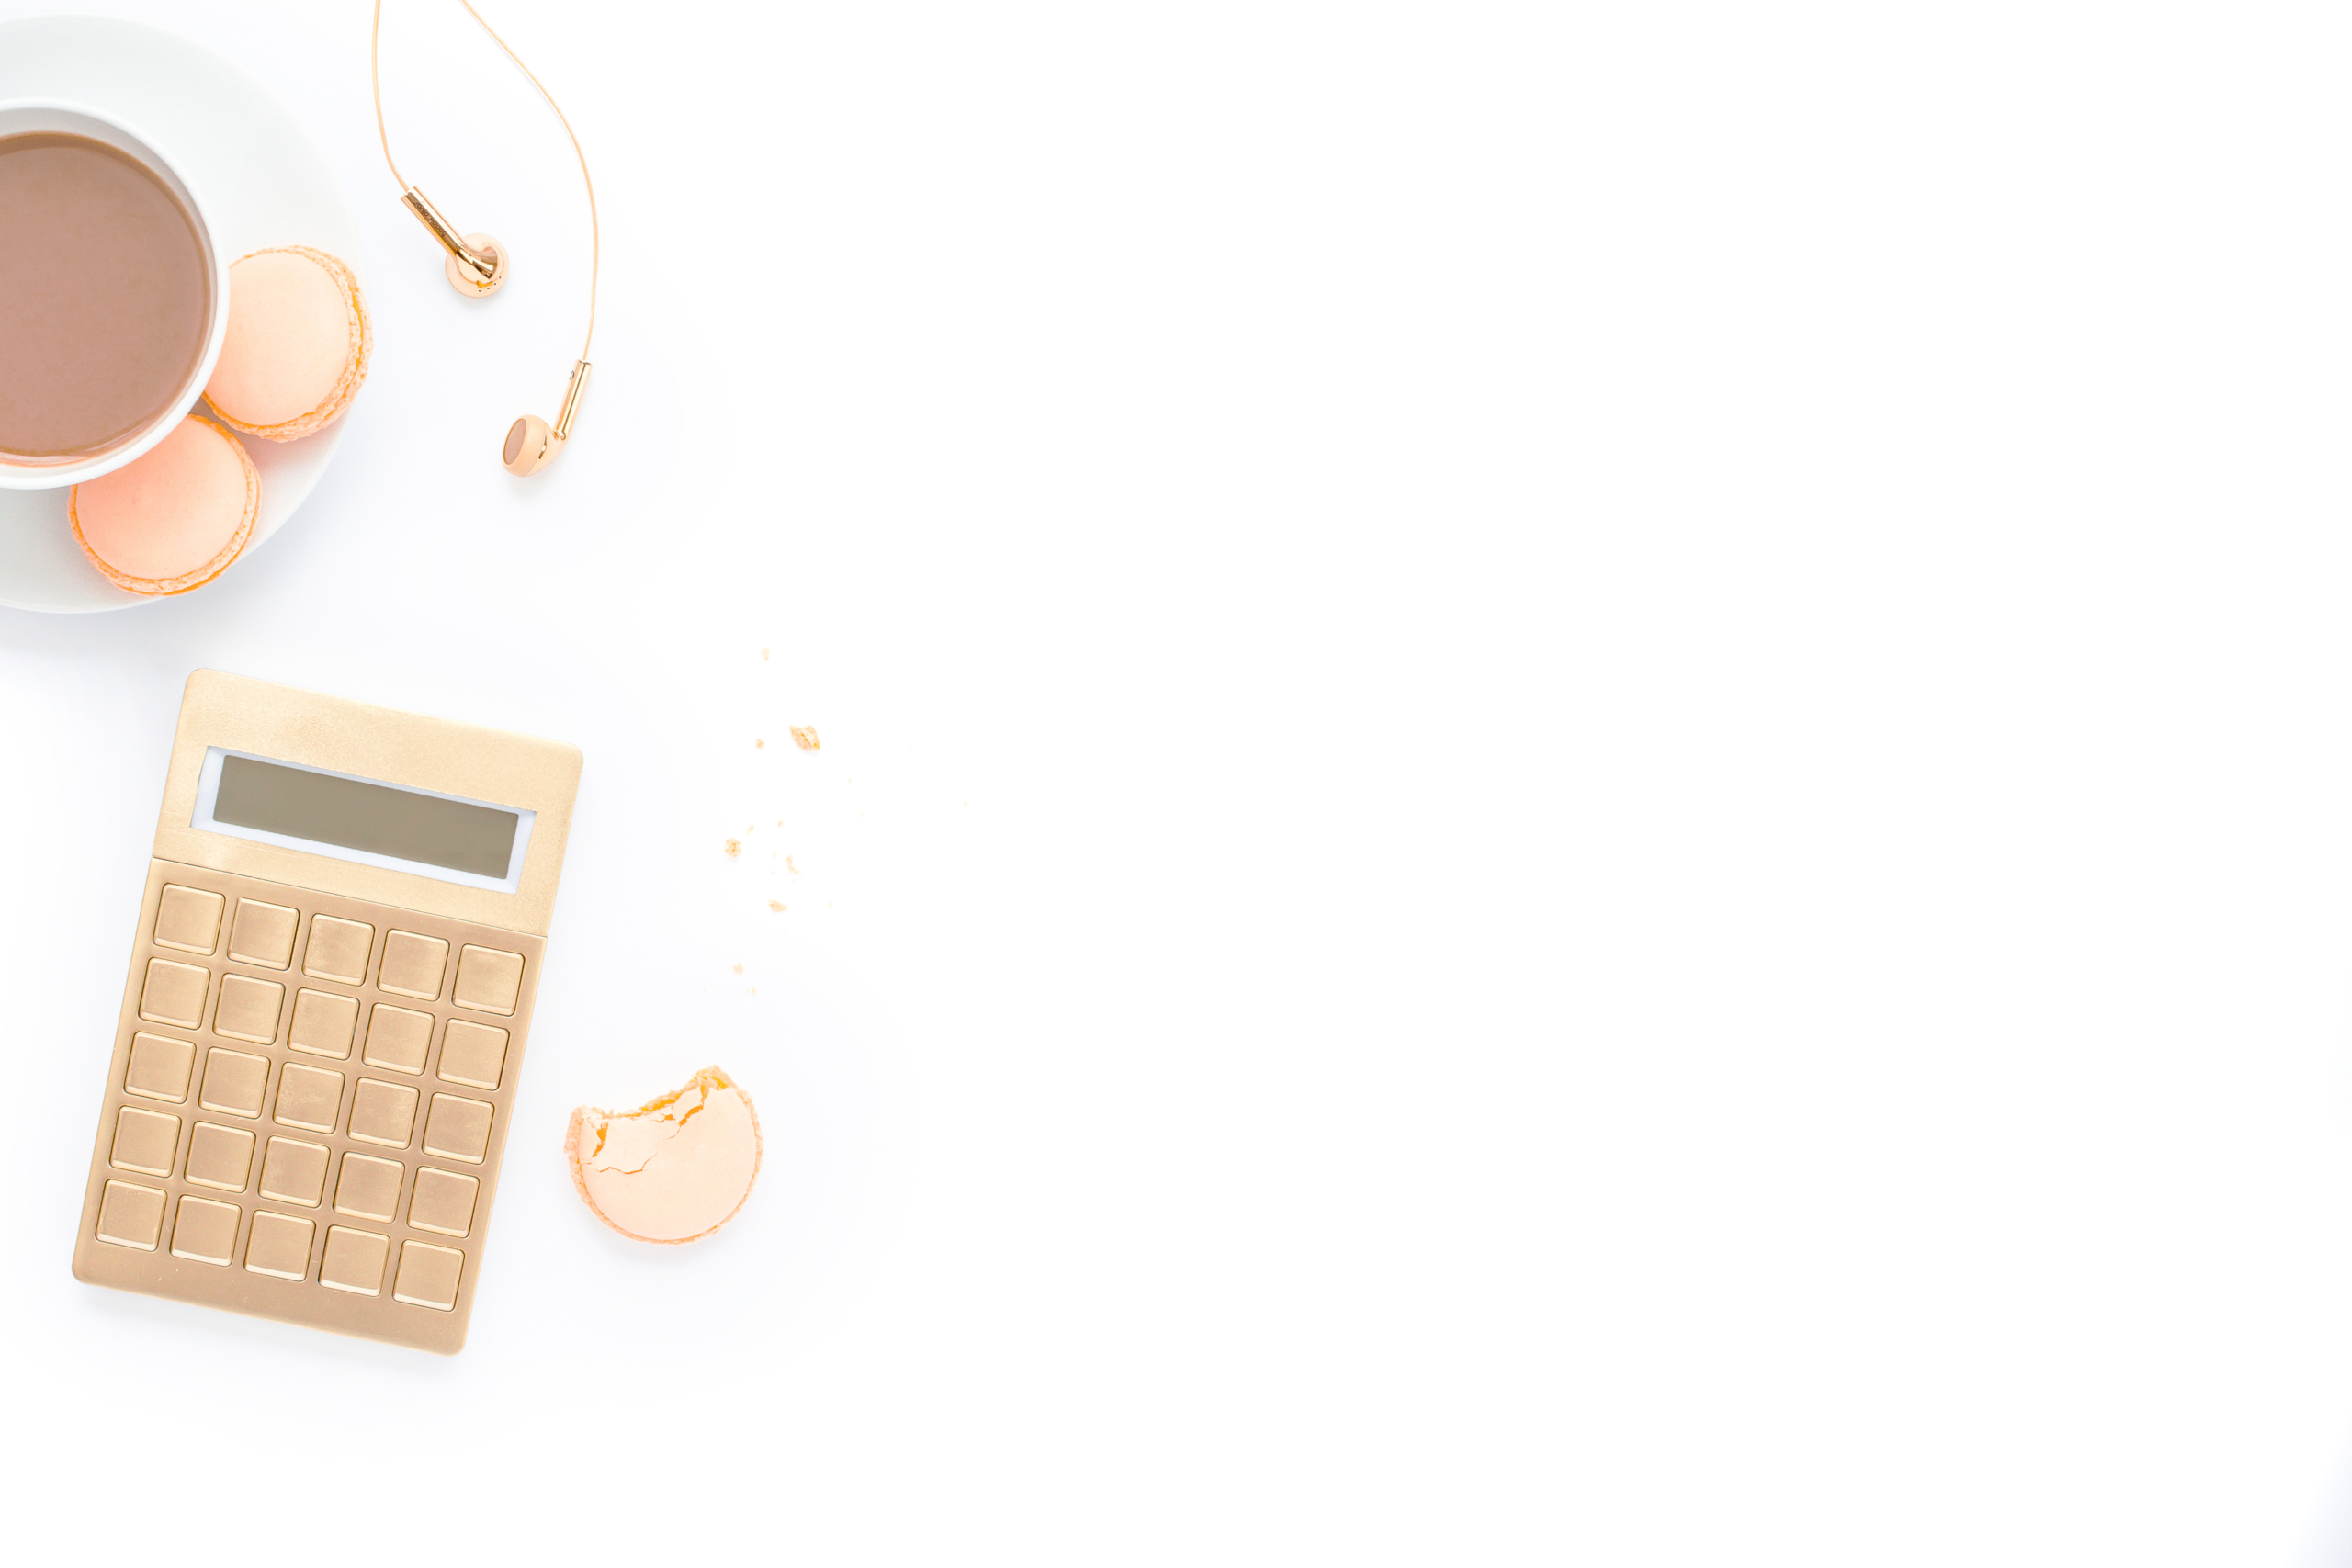 rose gold calculator with macarons